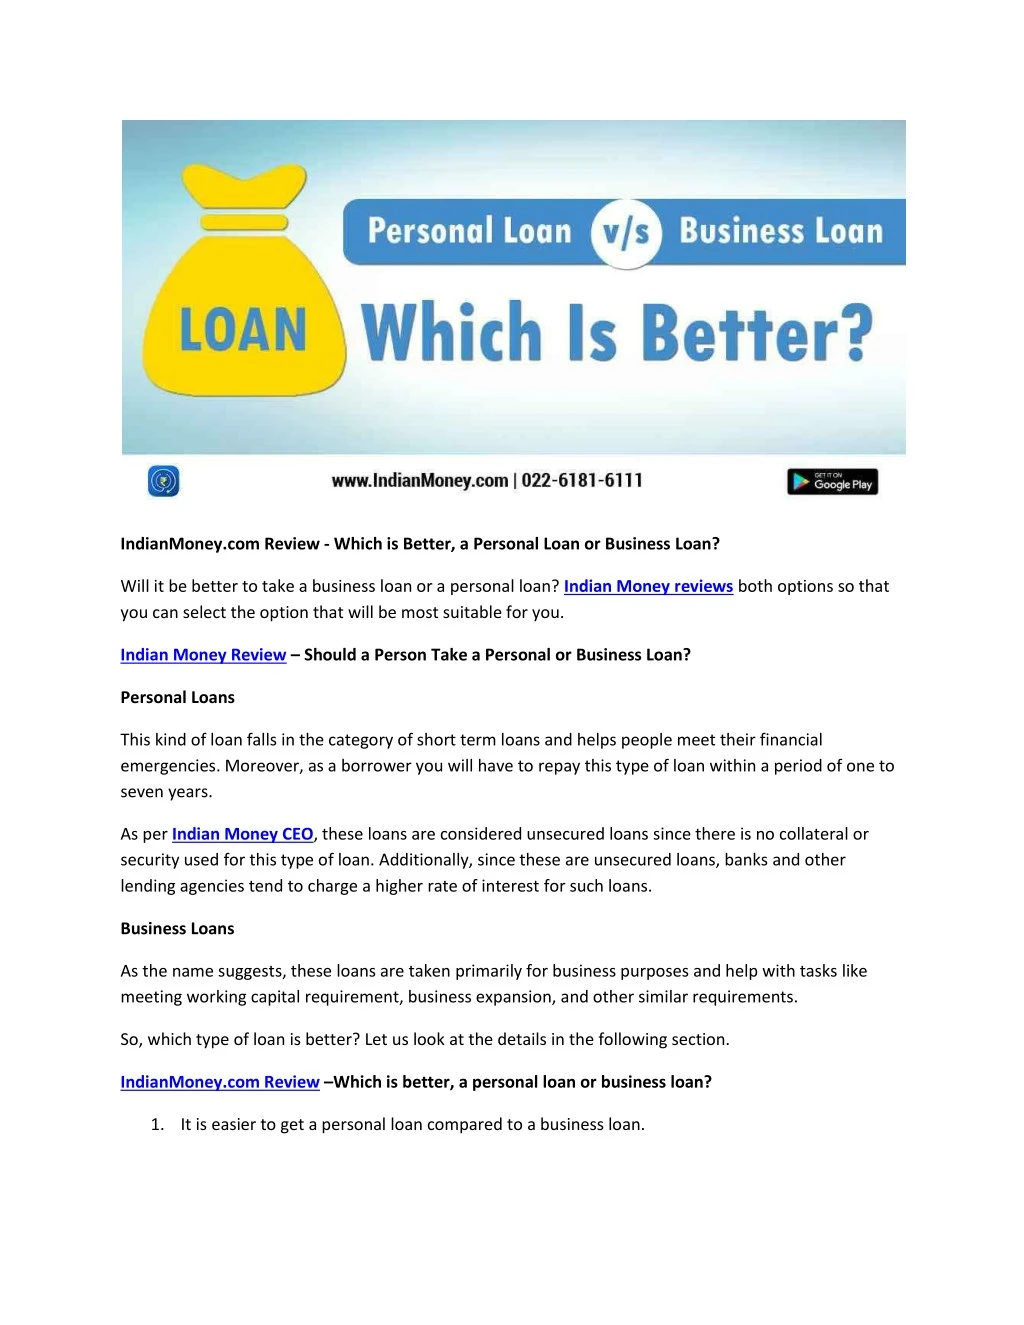 indianmoney com review which is better a personal